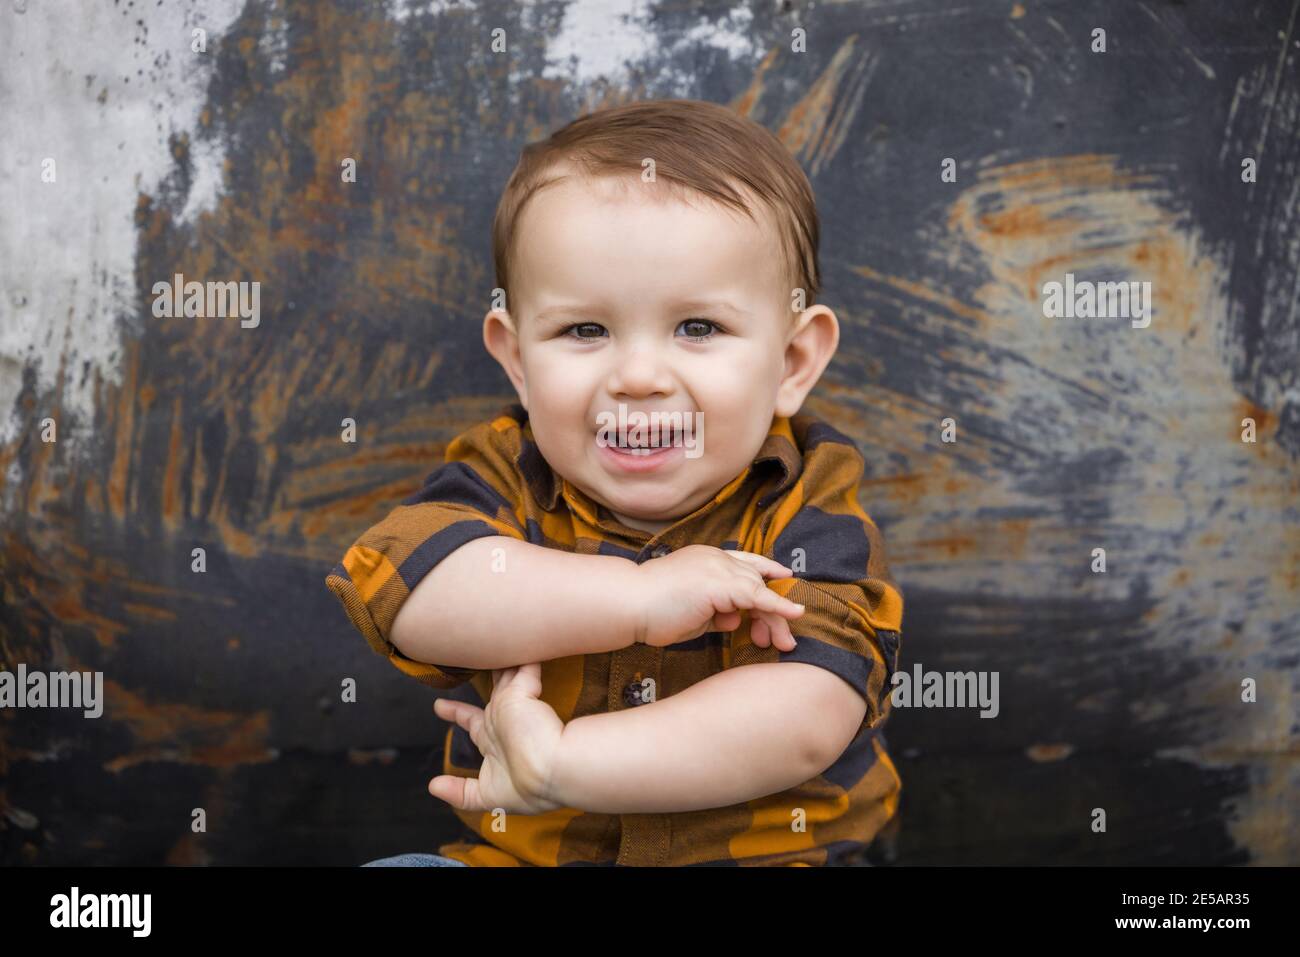 A baby boy eleven months old outdoors in the winter in a downtown setting. Stock Photo